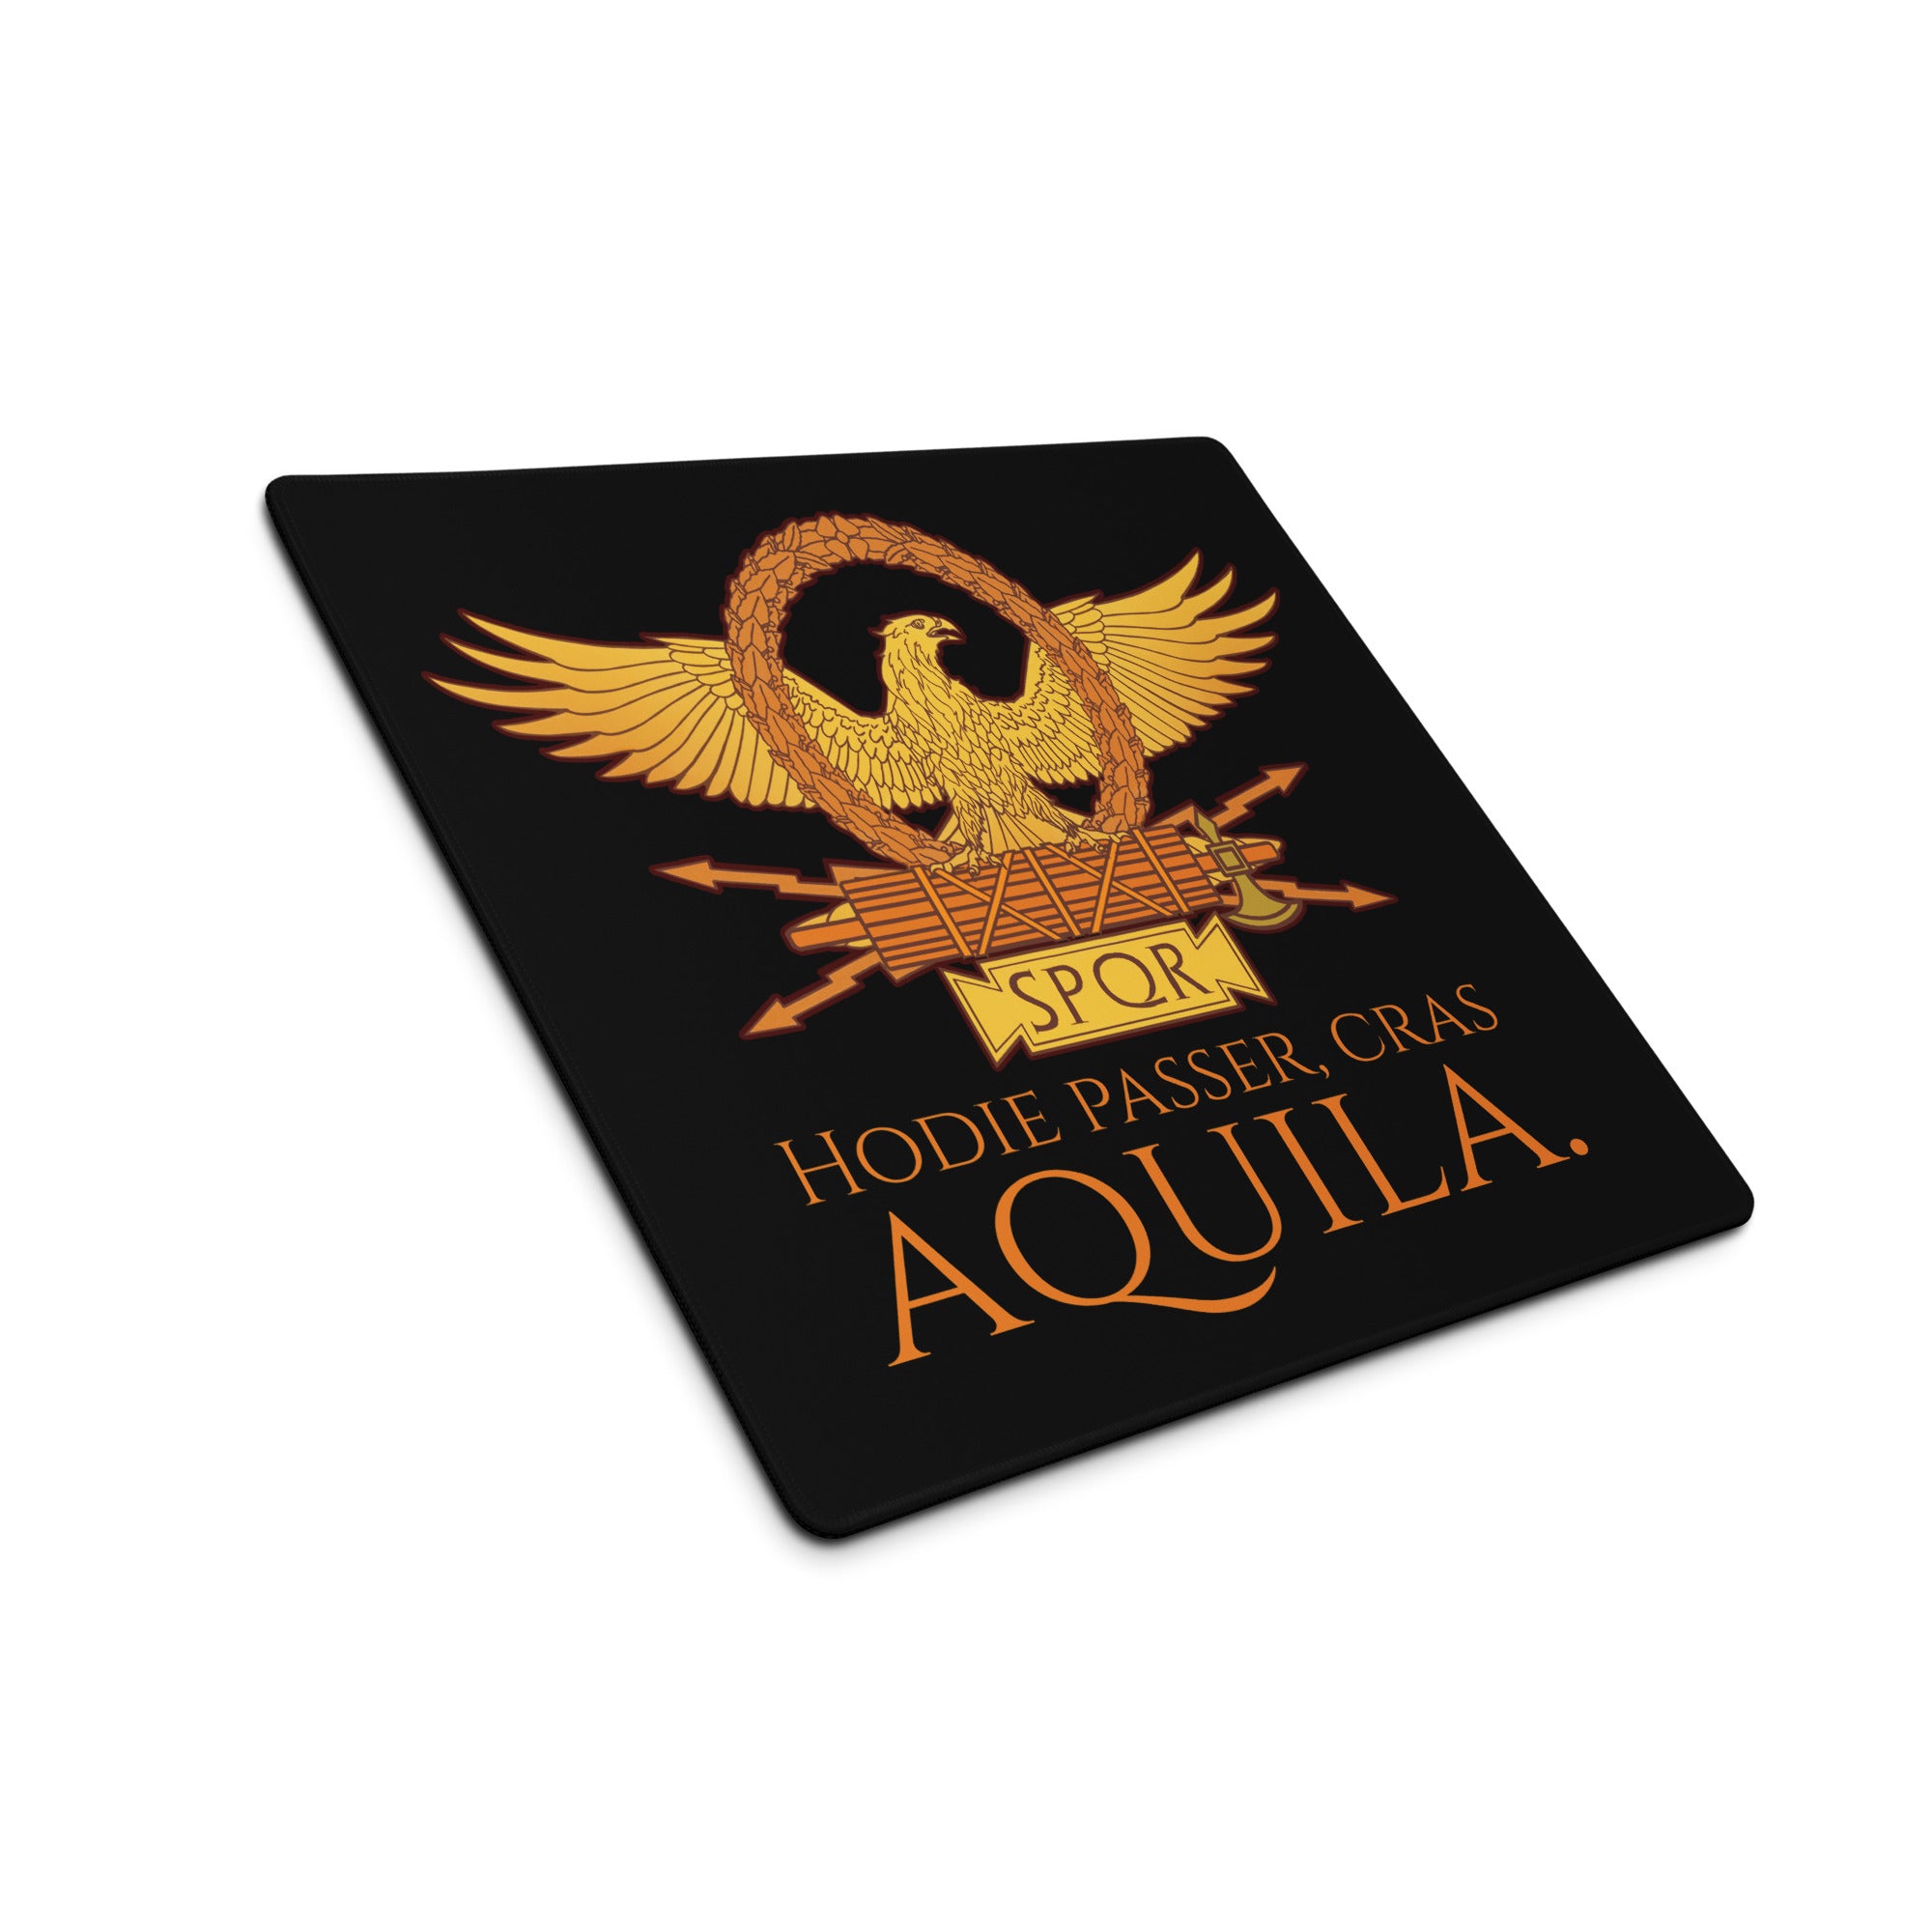 Hodie Passer, Cras Aquila. - Today A Sparrow, Tomorrow An Eagle - Ancient Rome Latin Language - Gaming Mouse Pad